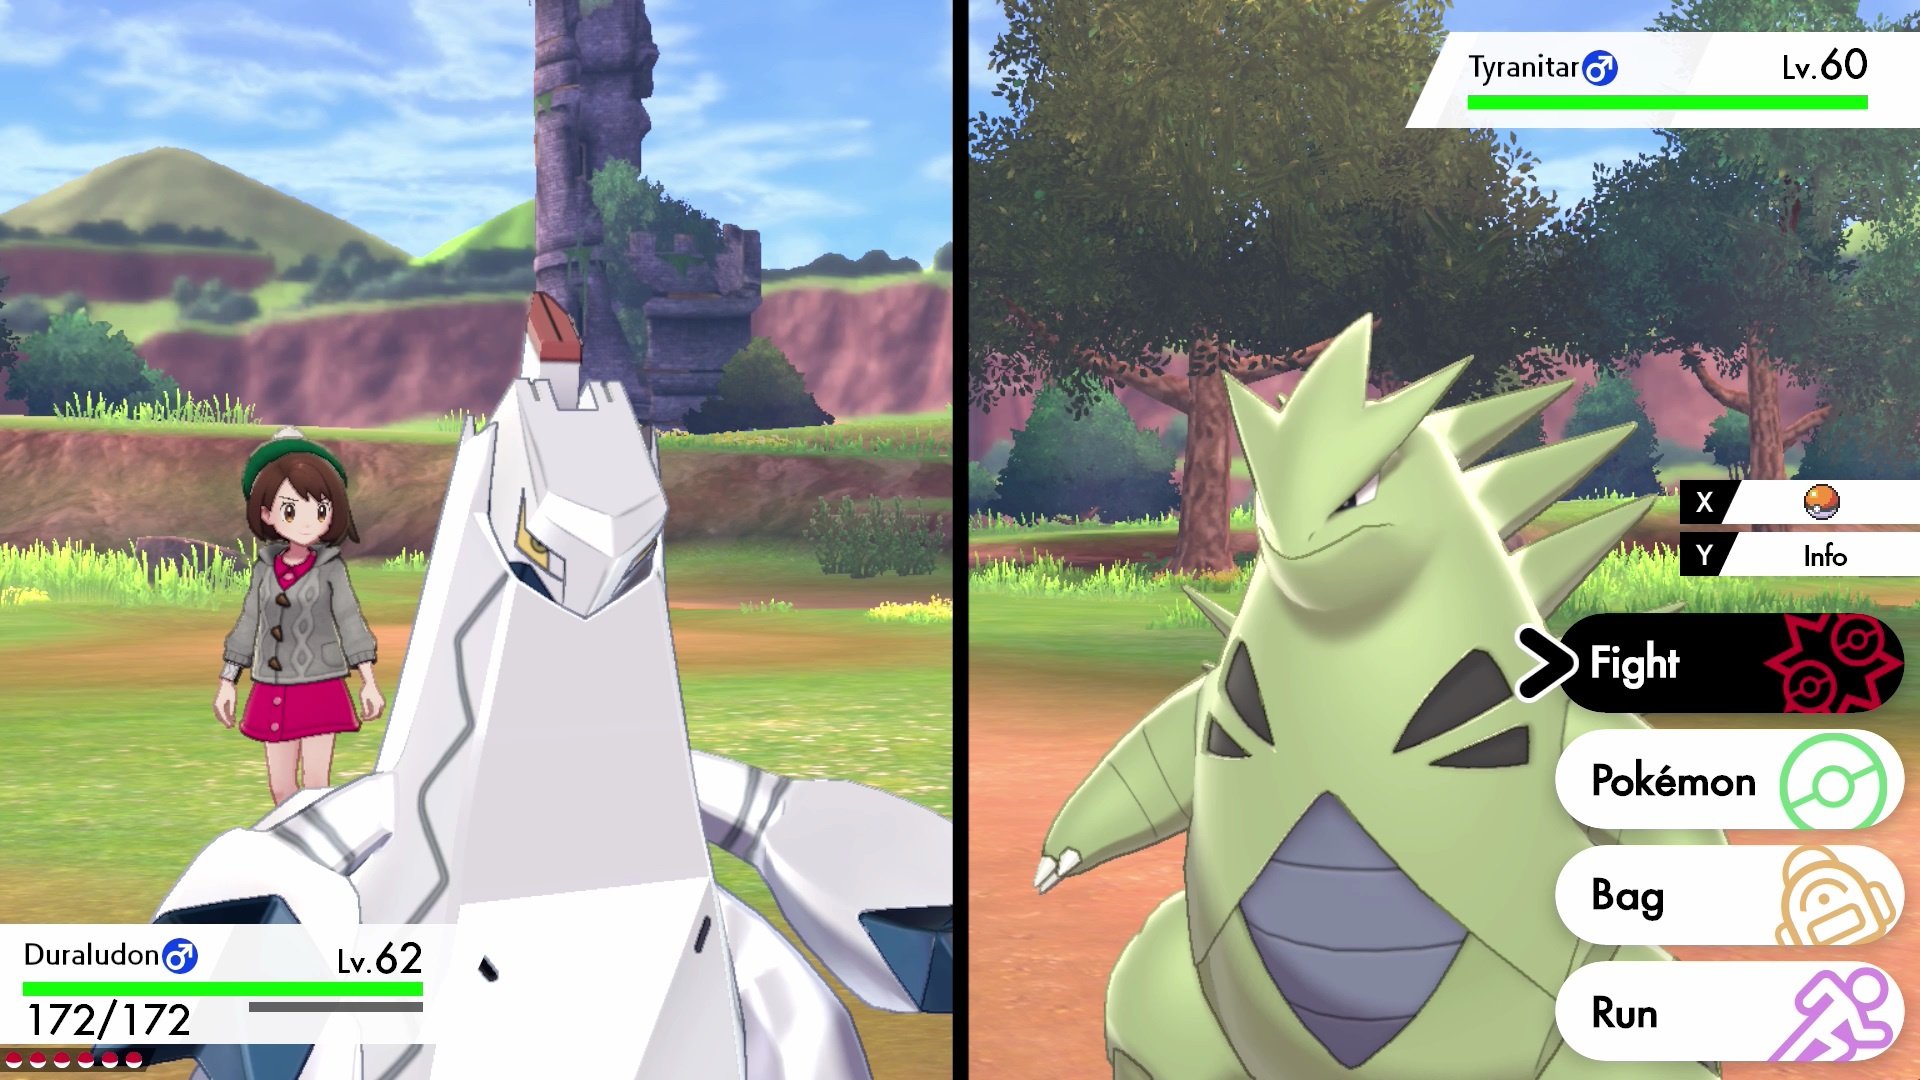 How to get more PC box space in Pokémon Sword and Shield - Dot Esports